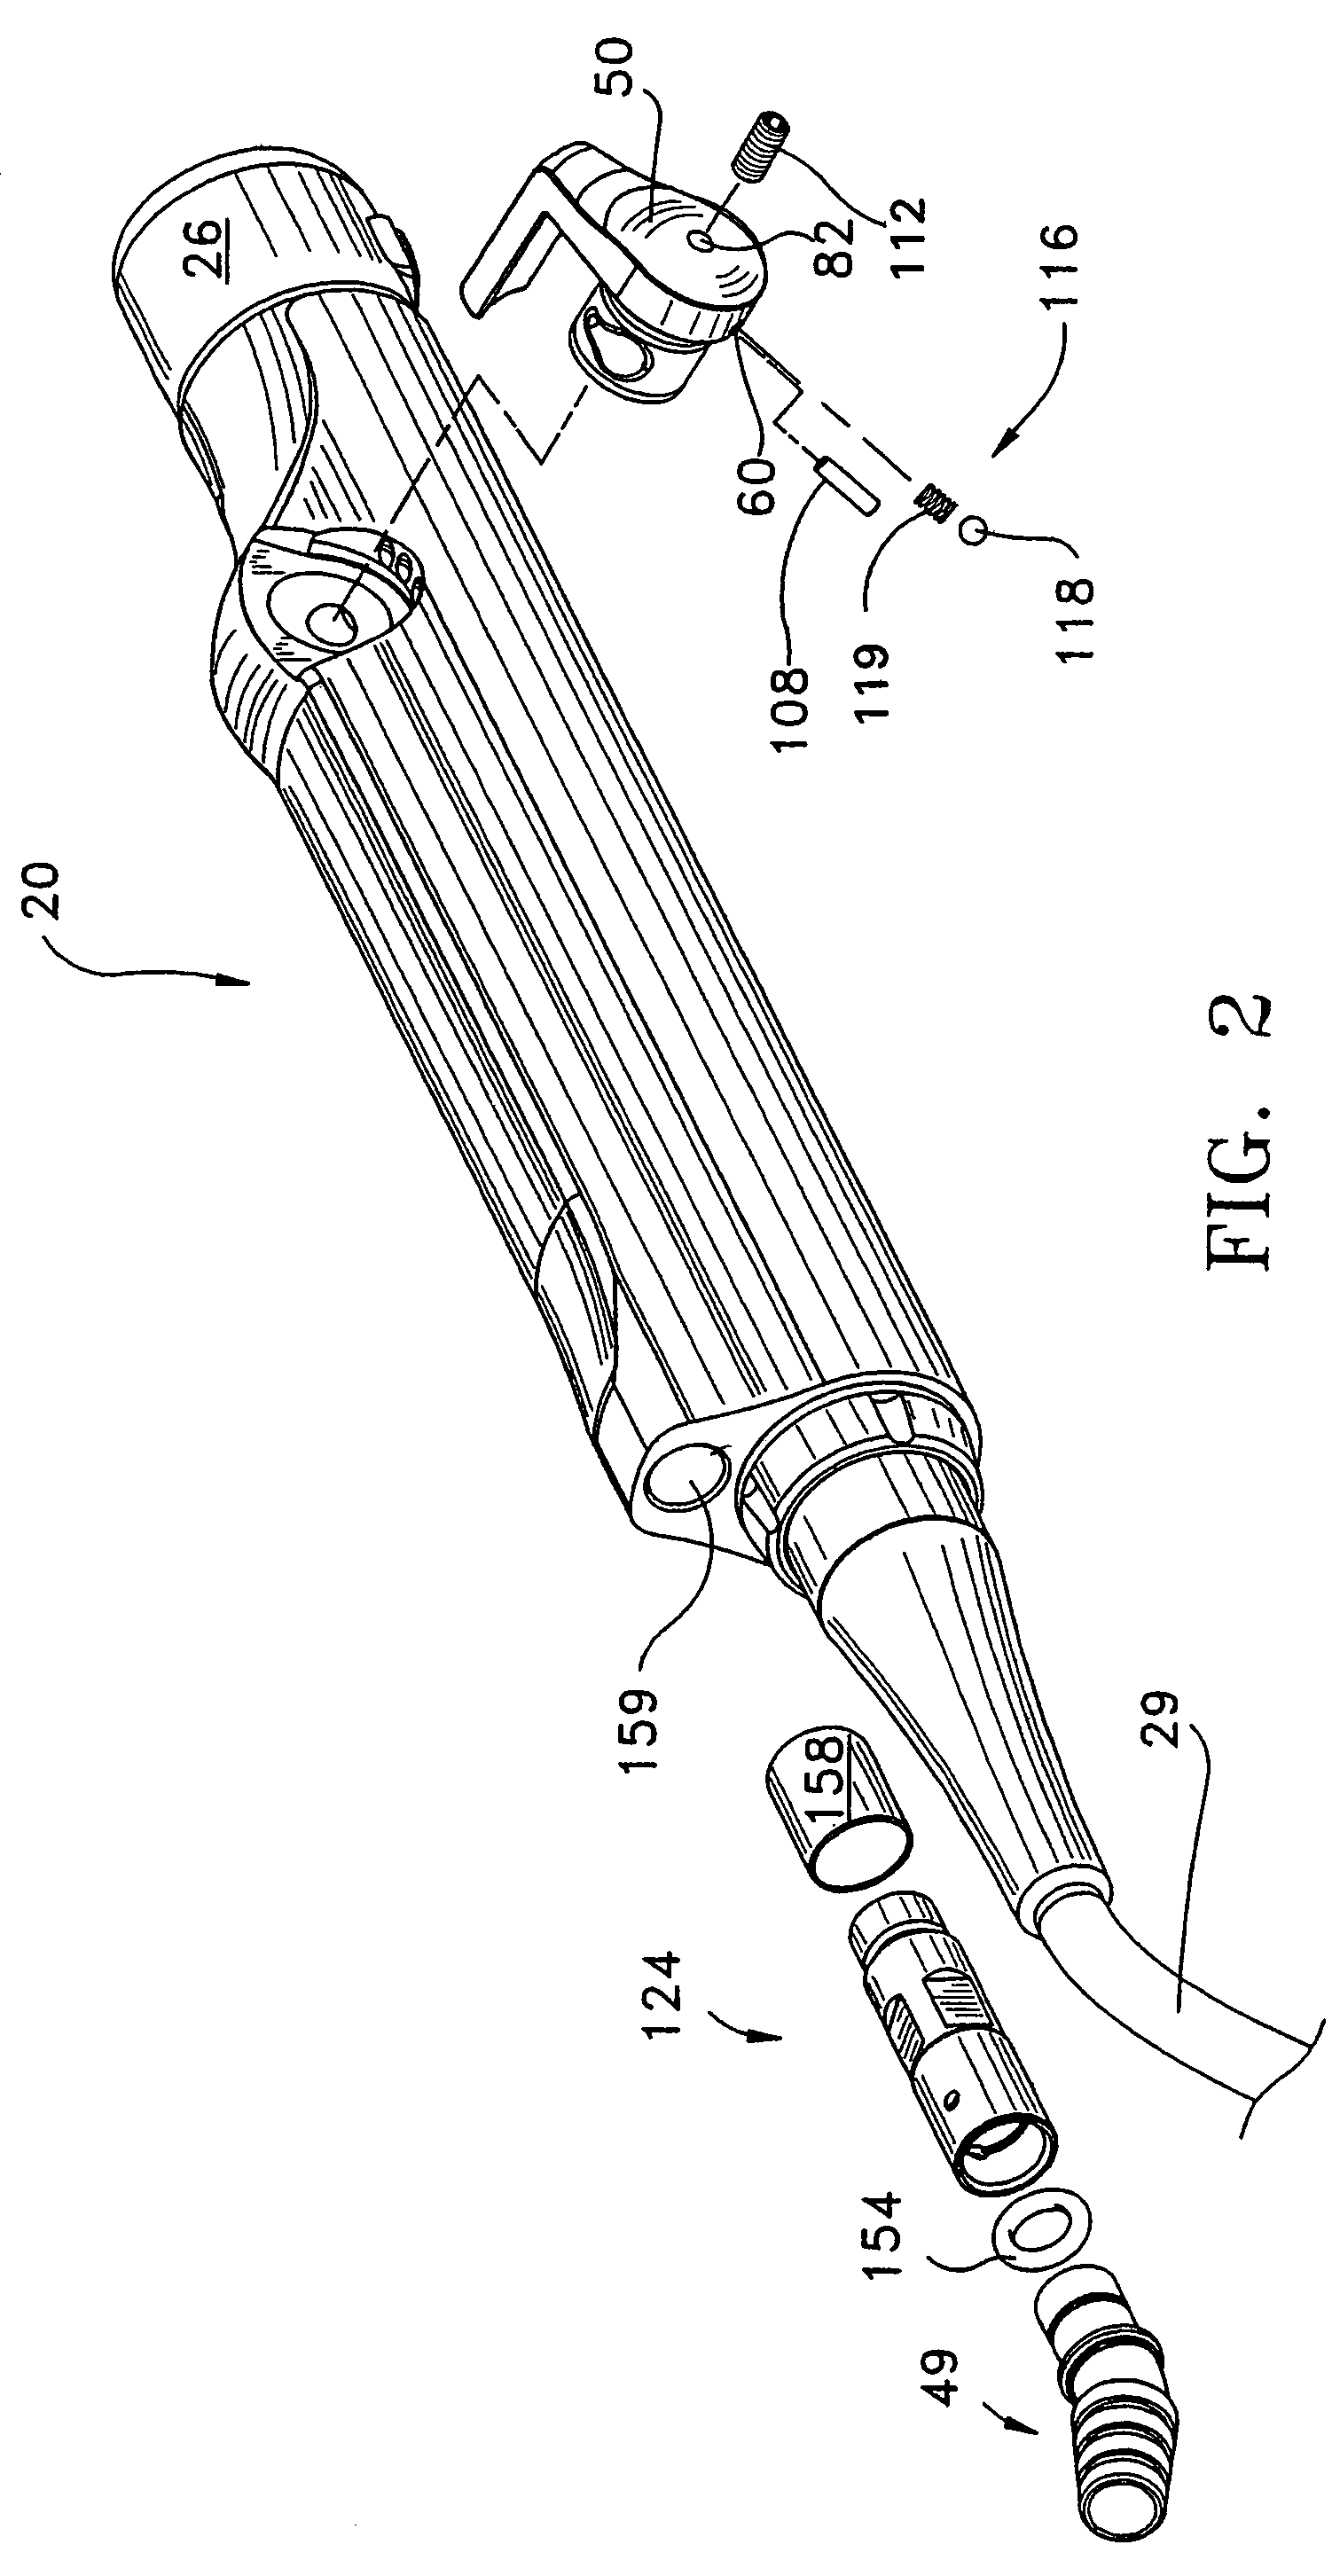 Powered surgical handpiece with precision suction control